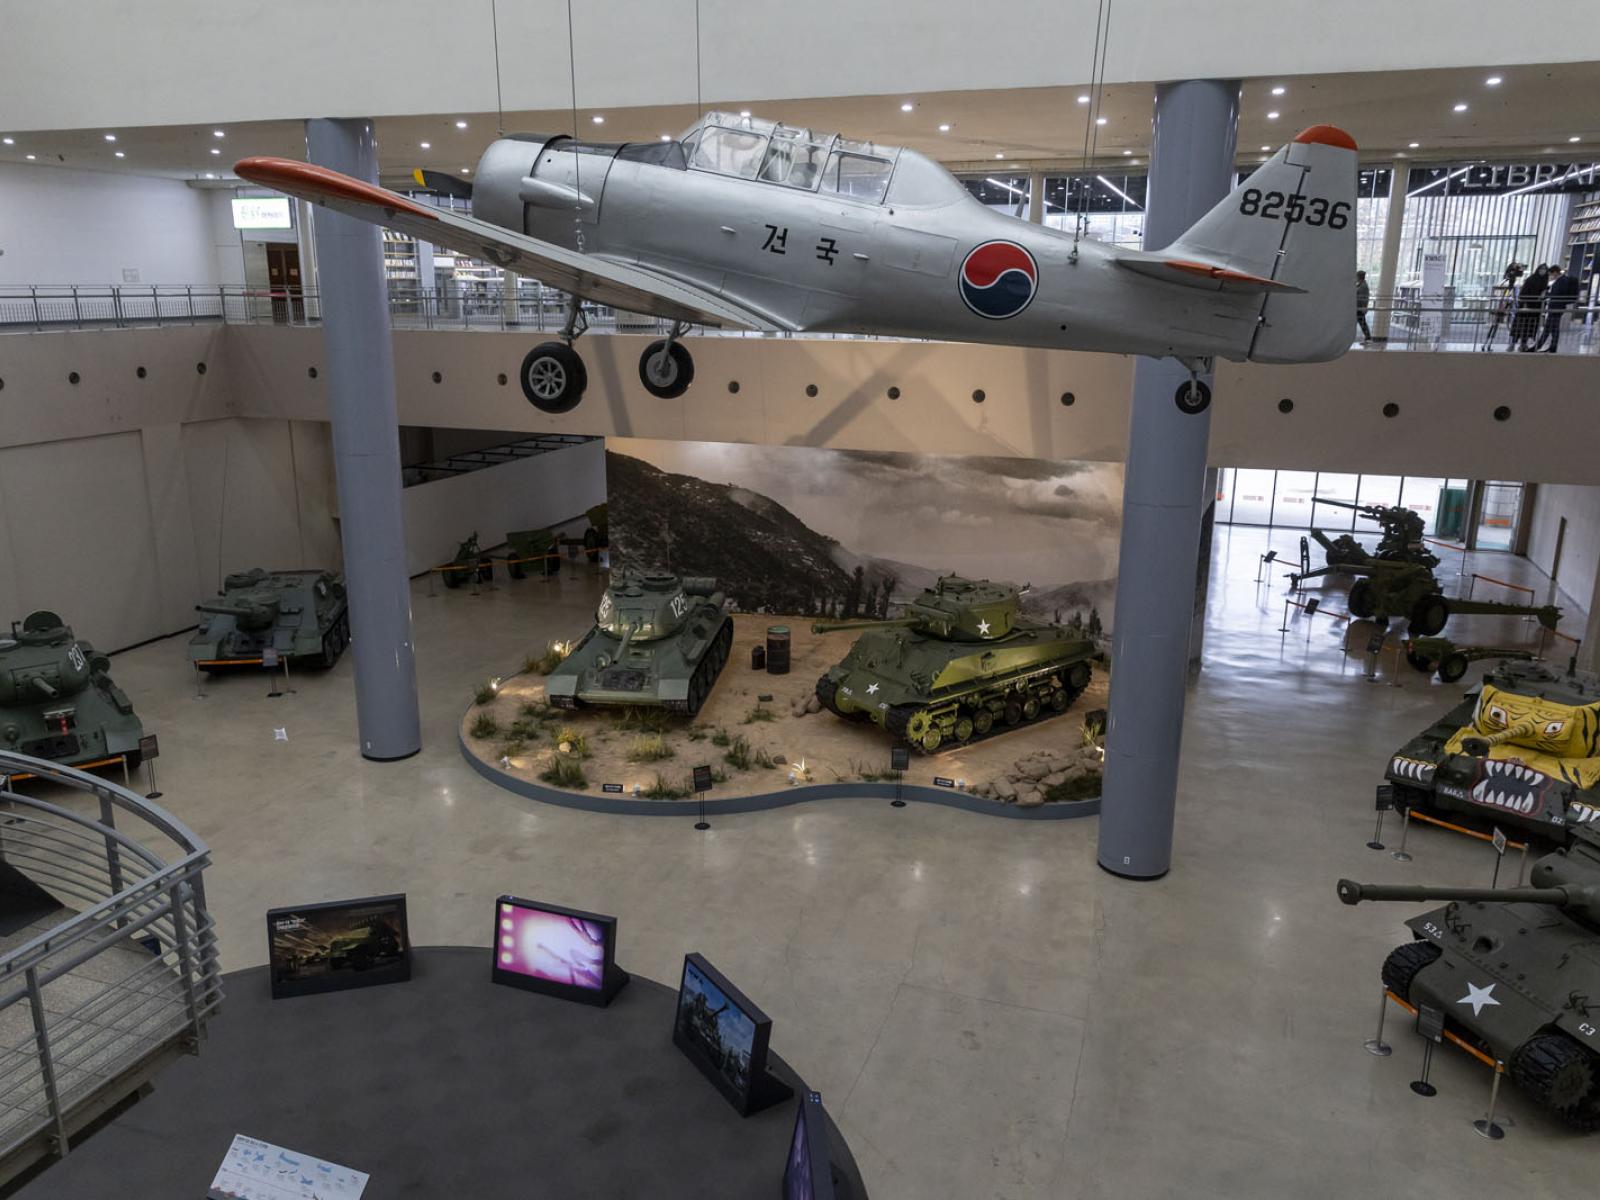 View on the planes and the tanks displayed in the museum